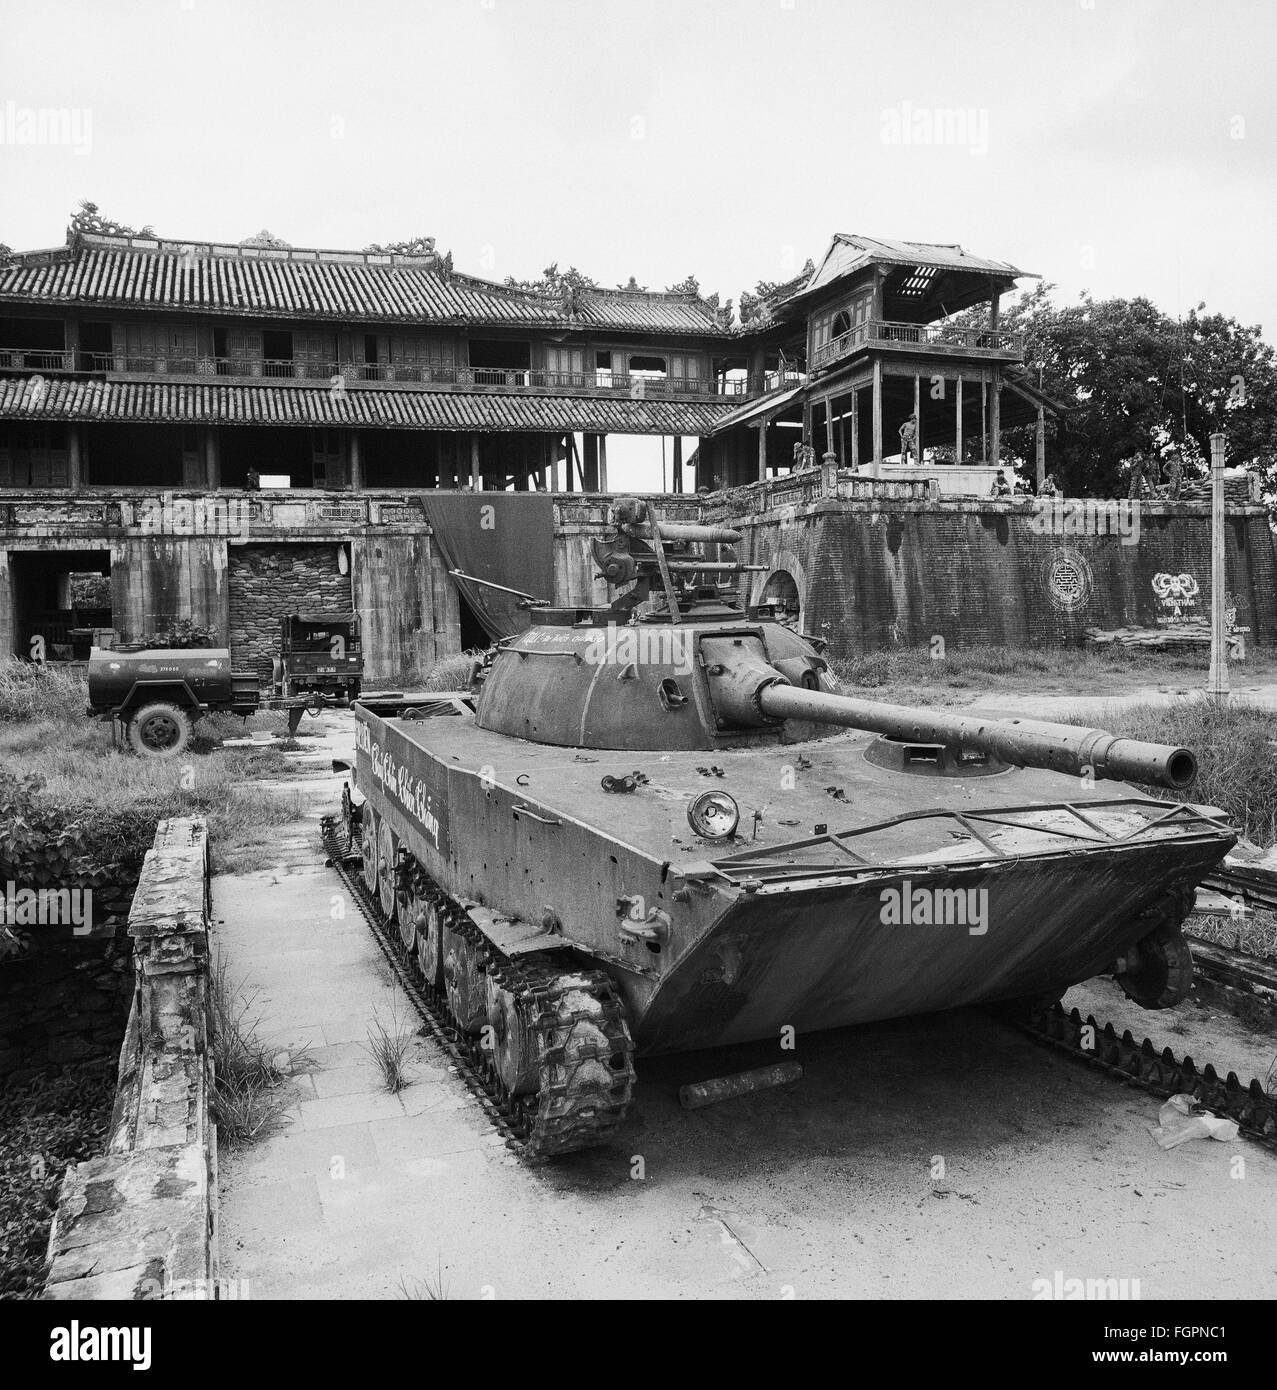 Vietnam War North-Vietnamese tank in front of the Ngo Mon Gate of the ...